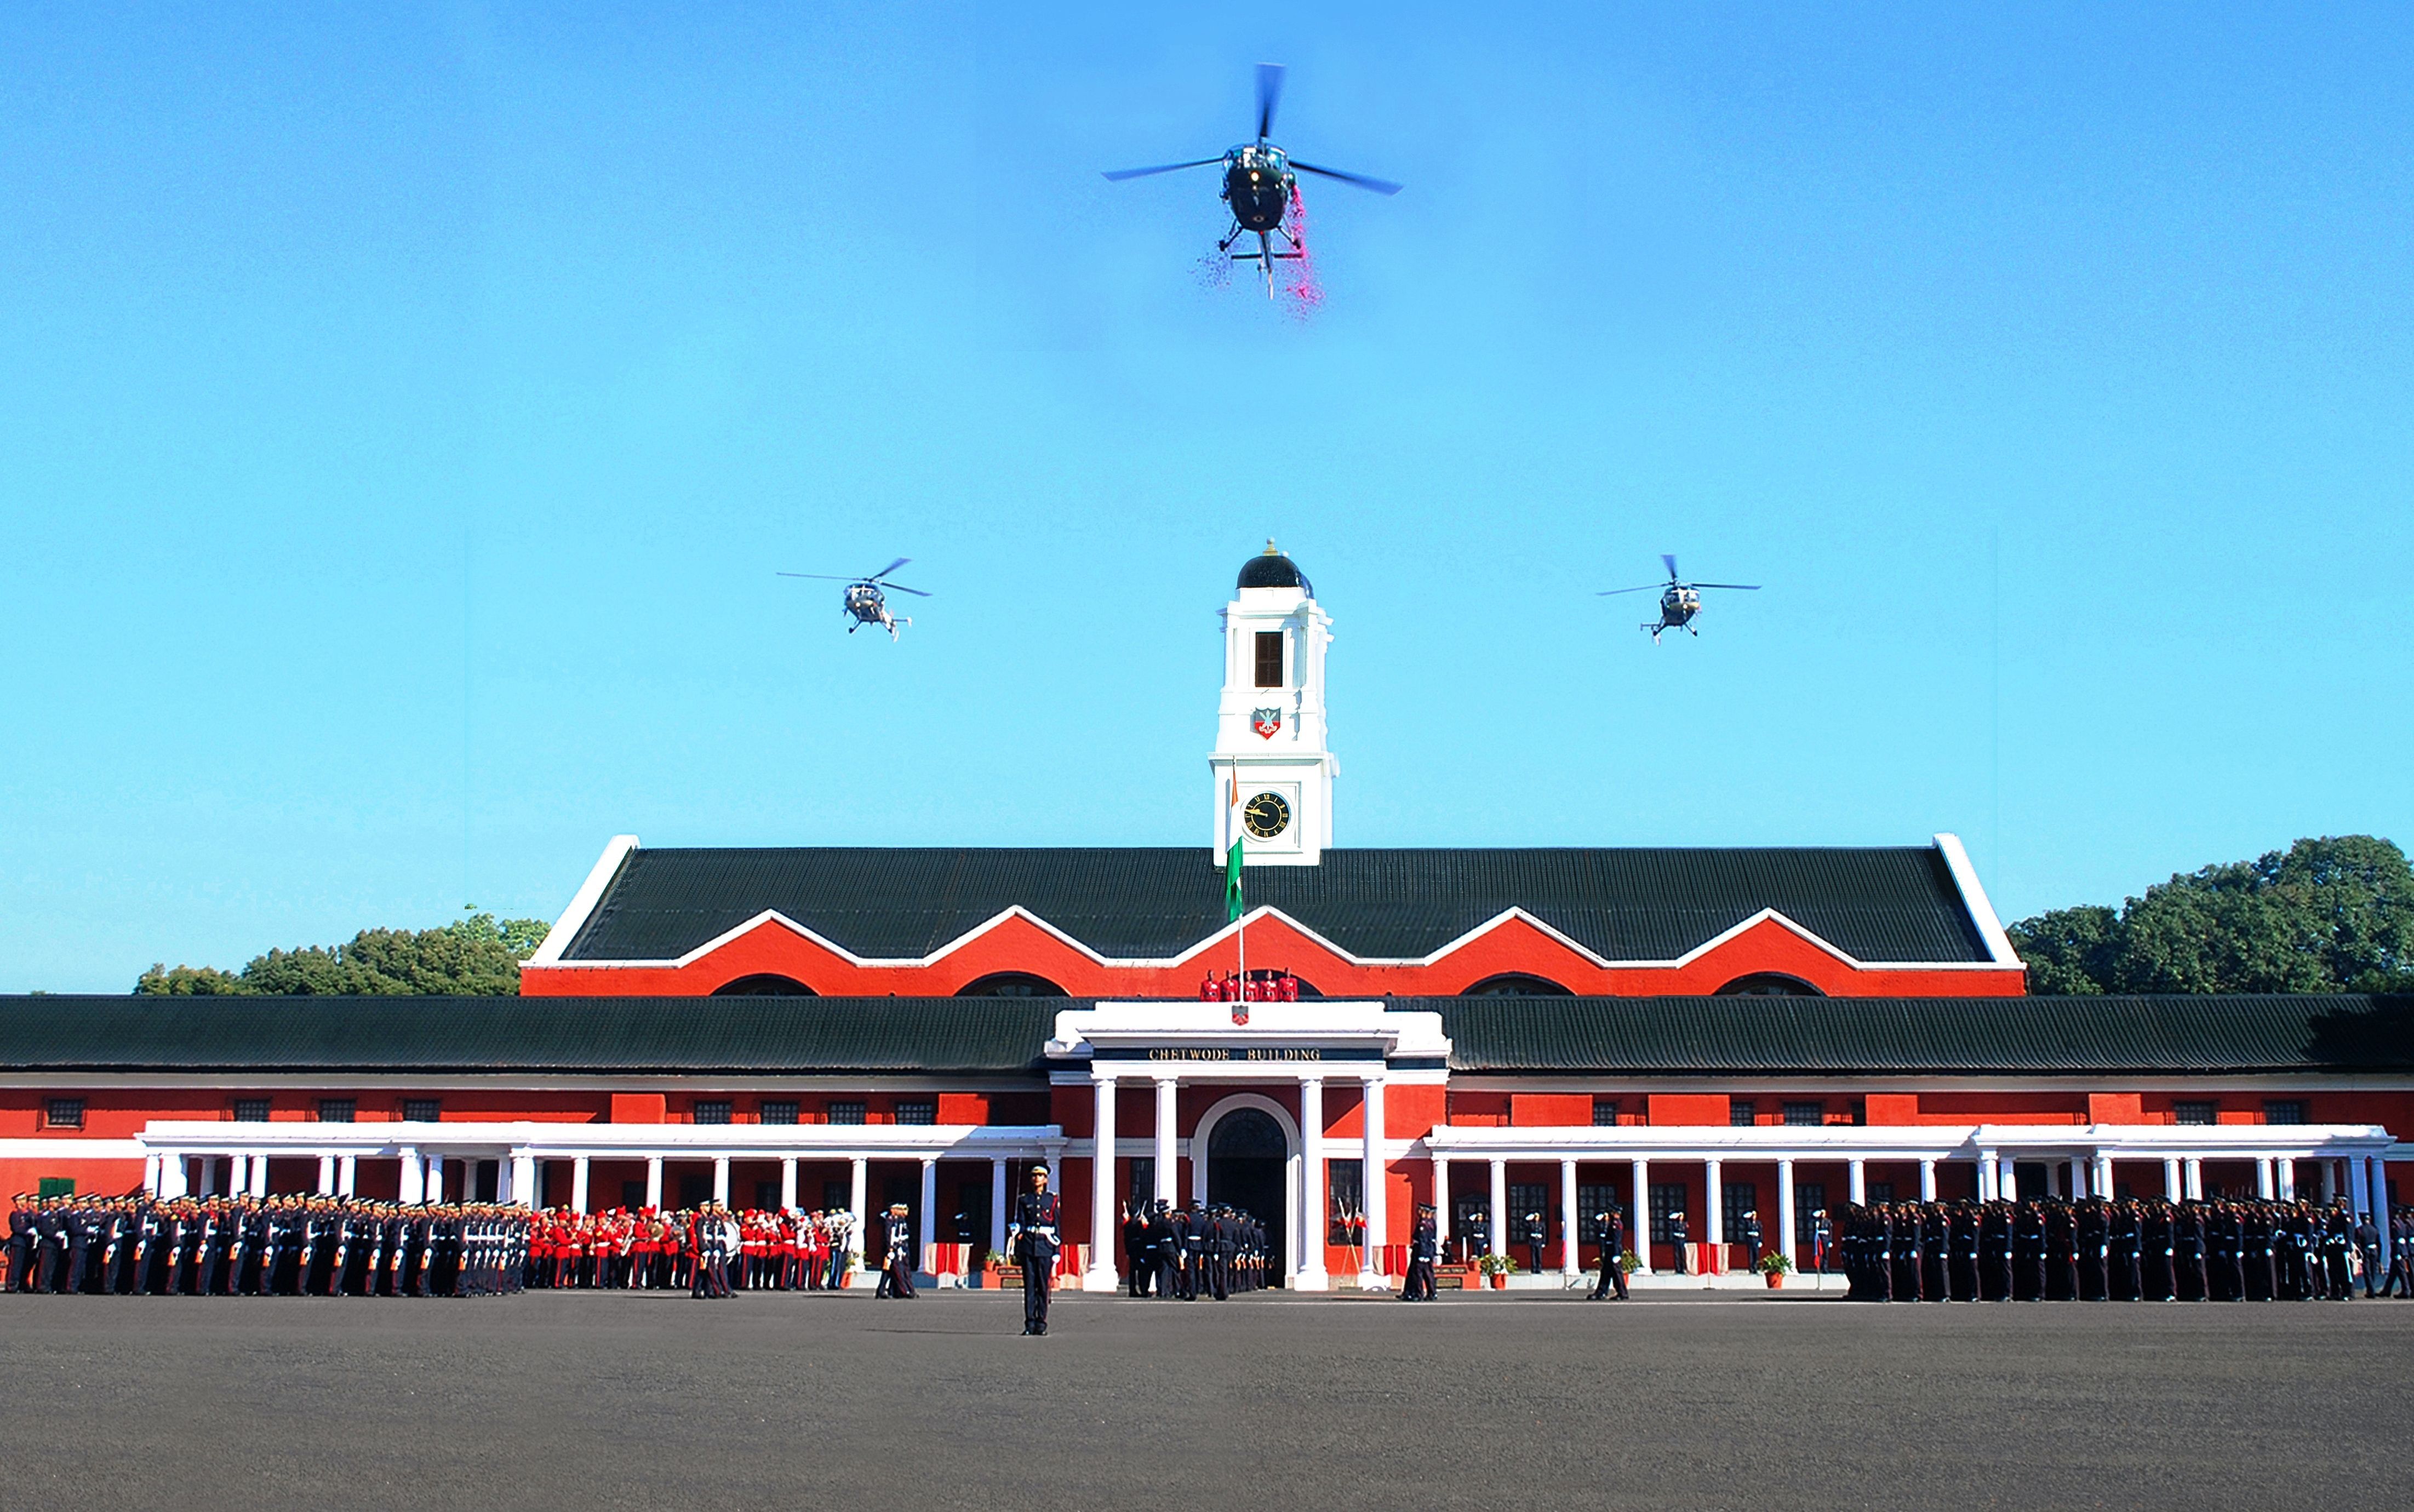 This Indian Military Academy is situated in Dehradun, Can you